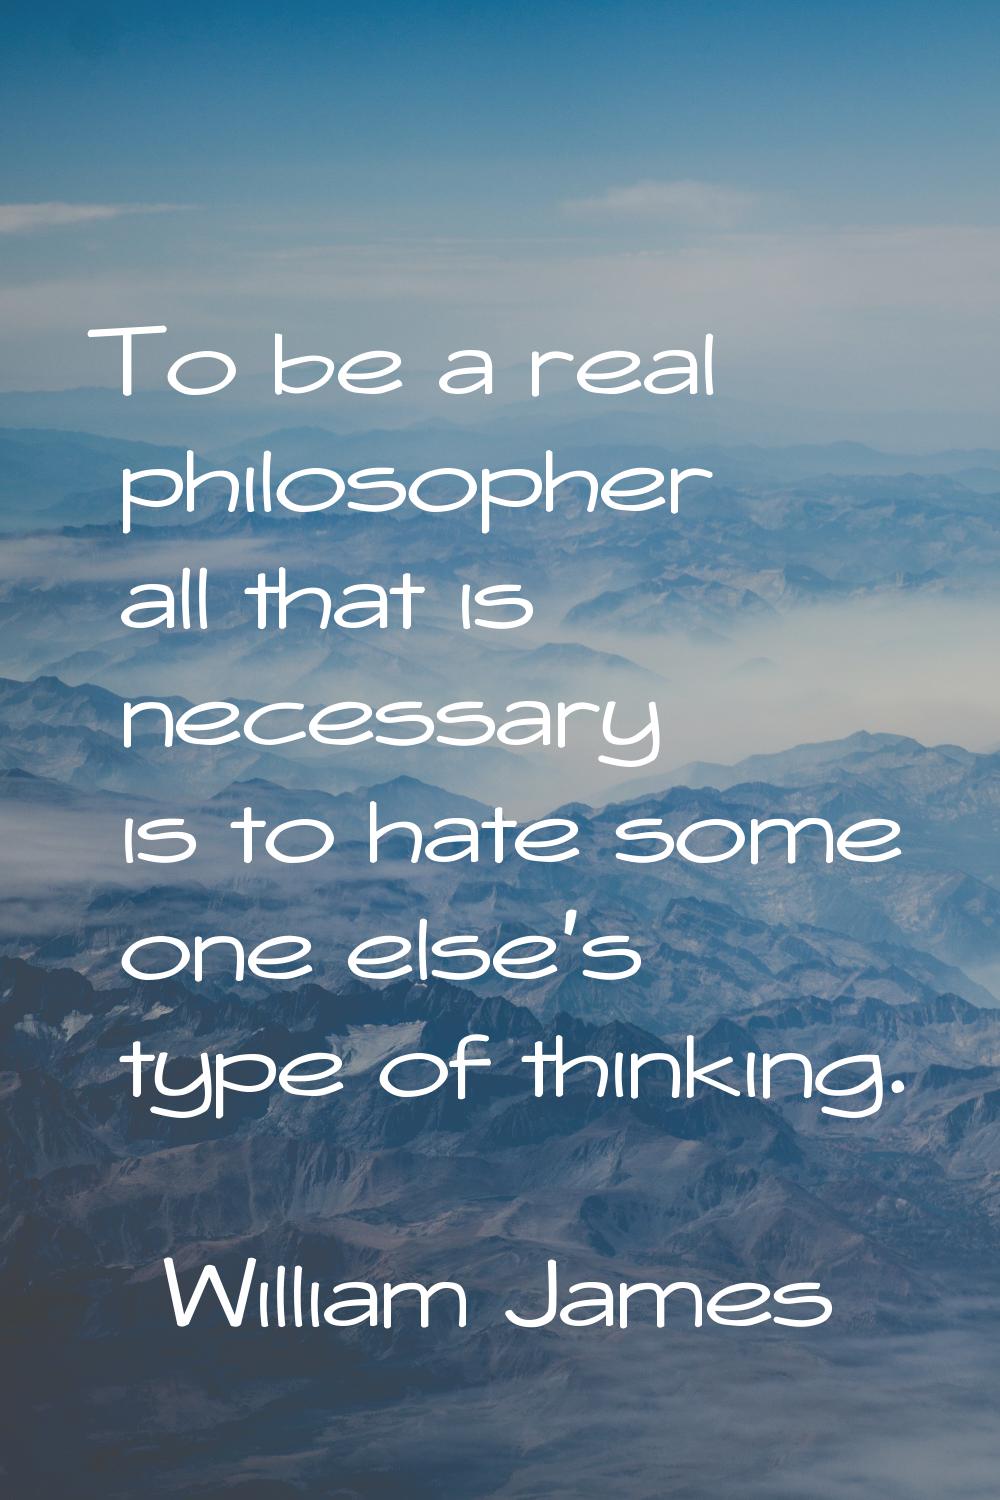 To be a real philosopher all that is necessary is to hate some one else's type of thinking.